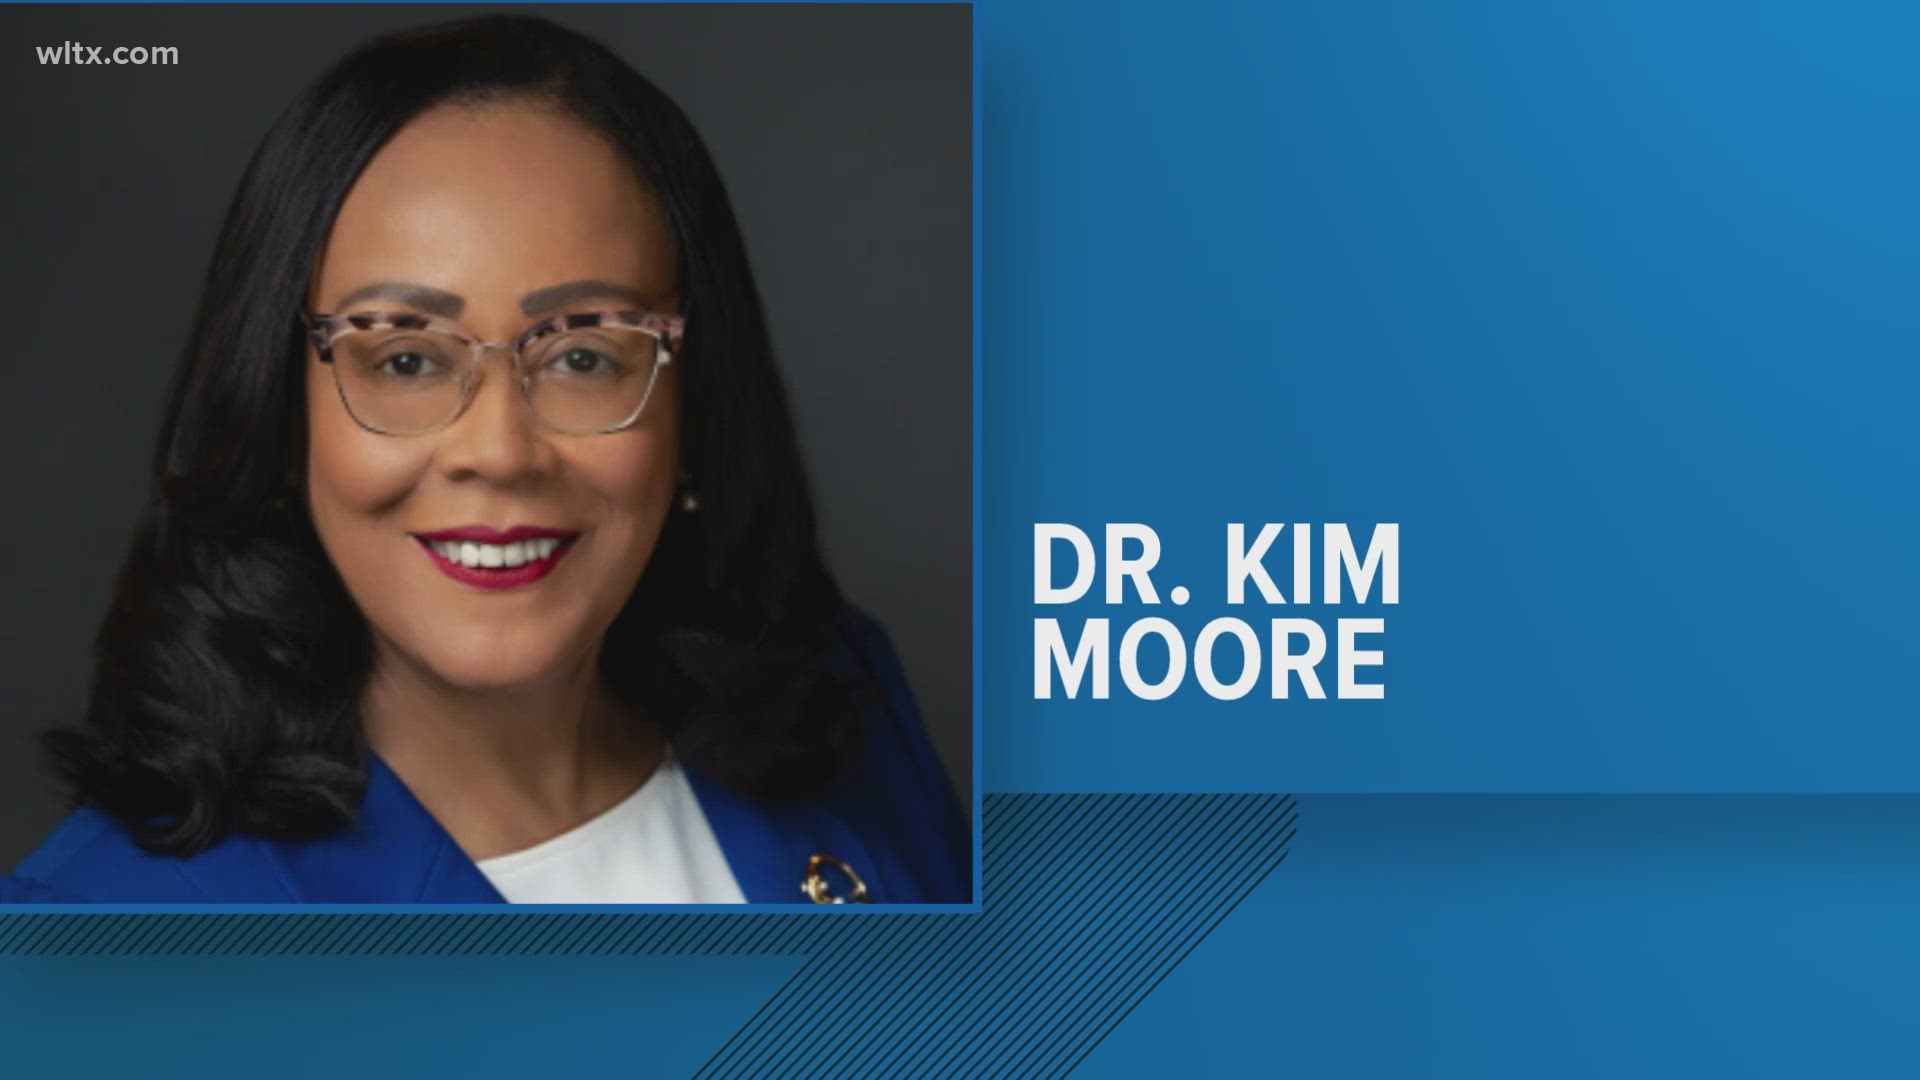 Richland School District Two has hired Dr. Kim Moore to be its new superintendent after a months long search.